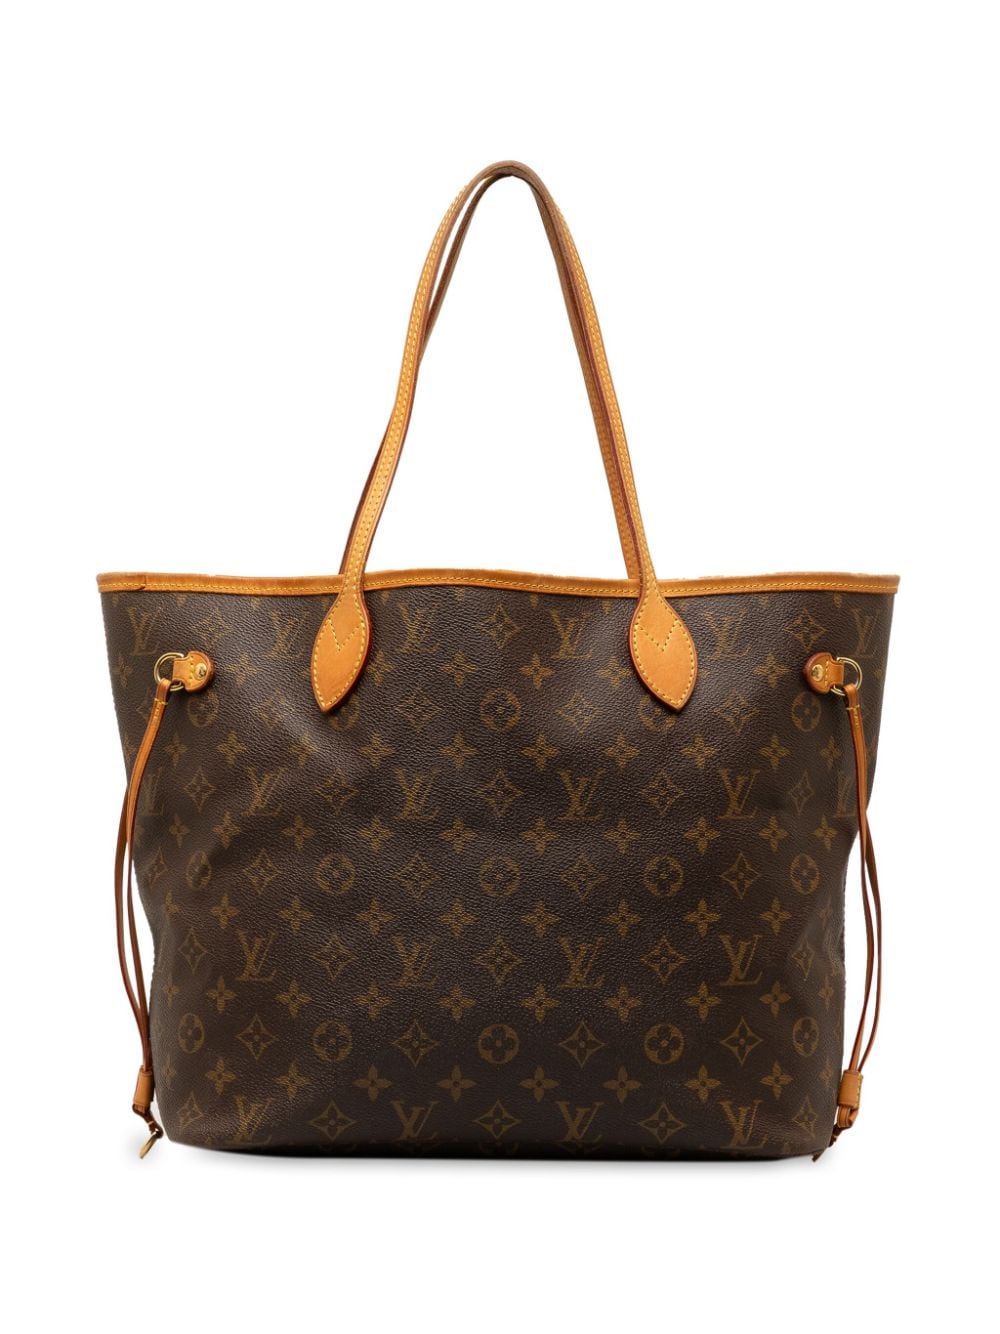 Pre-owned Louis Vuitton 2009 Monogram Neverfull Mm Tote Bag In Brown